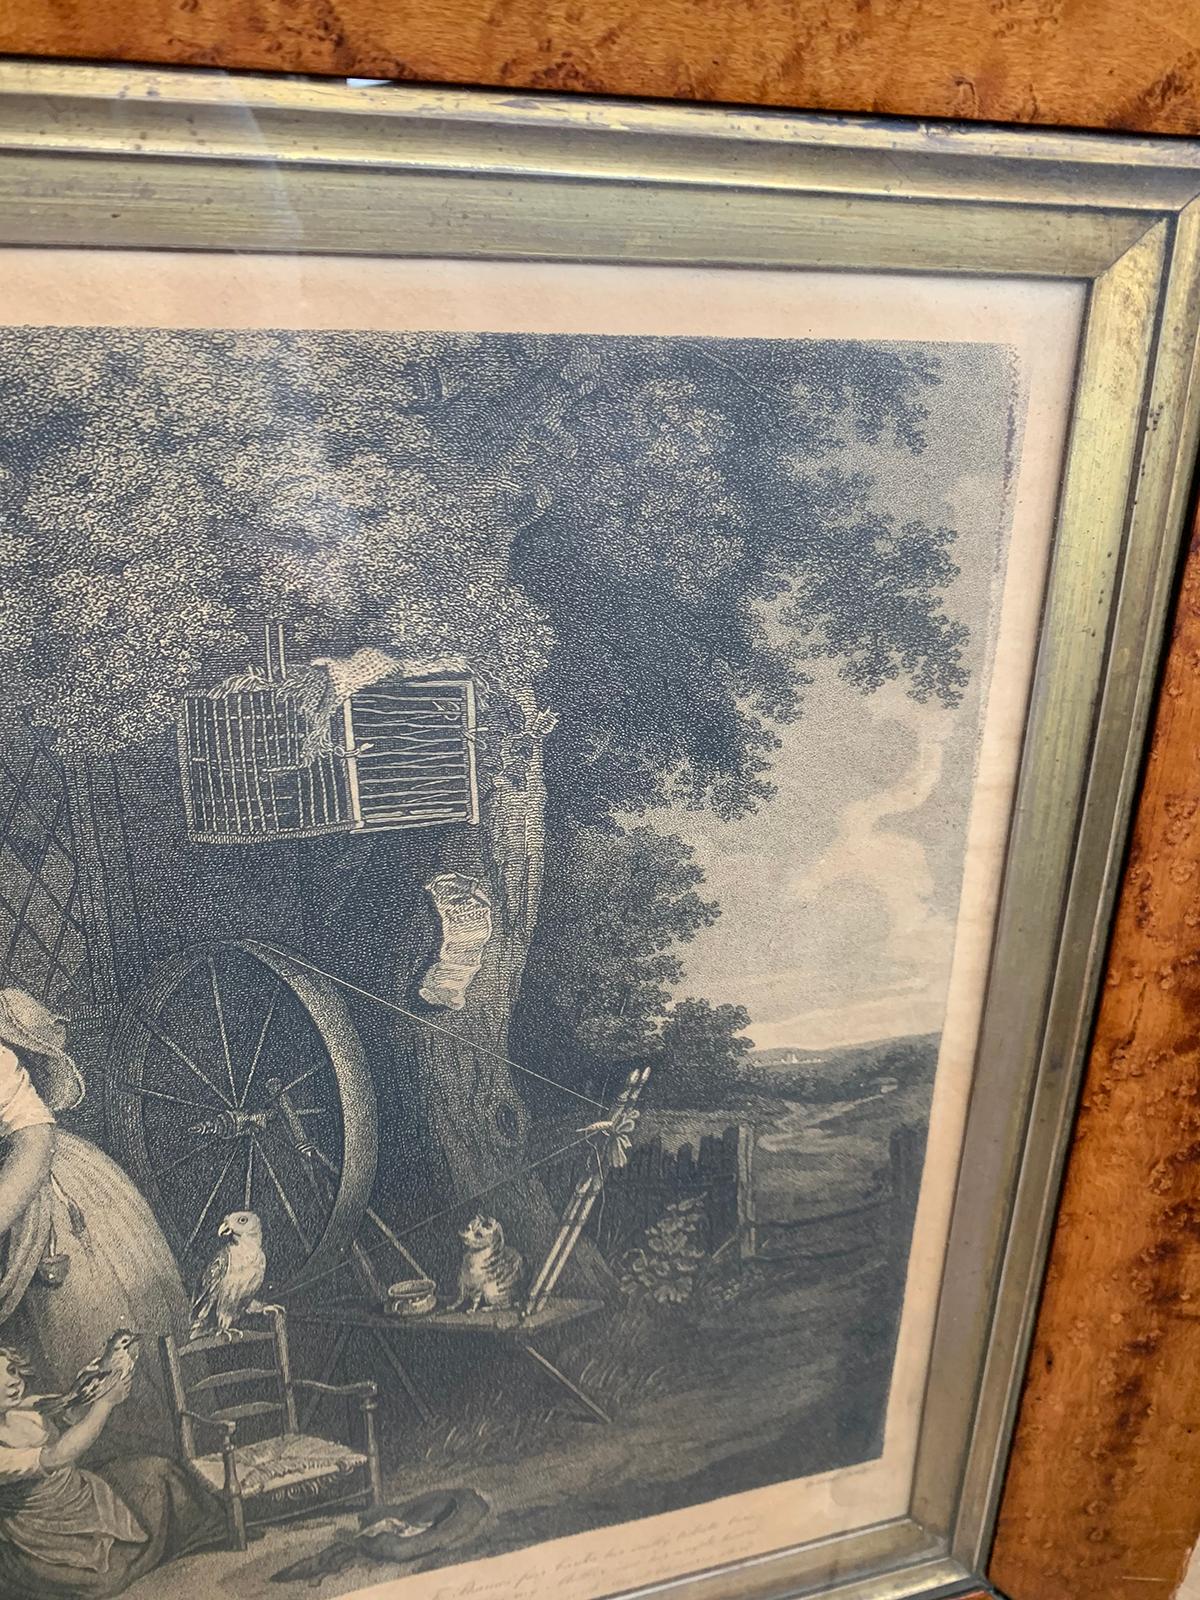 Pair of Framed English Engravings of Sailor Boys by Edward Orme, circa 1790-1800 For Sale 10